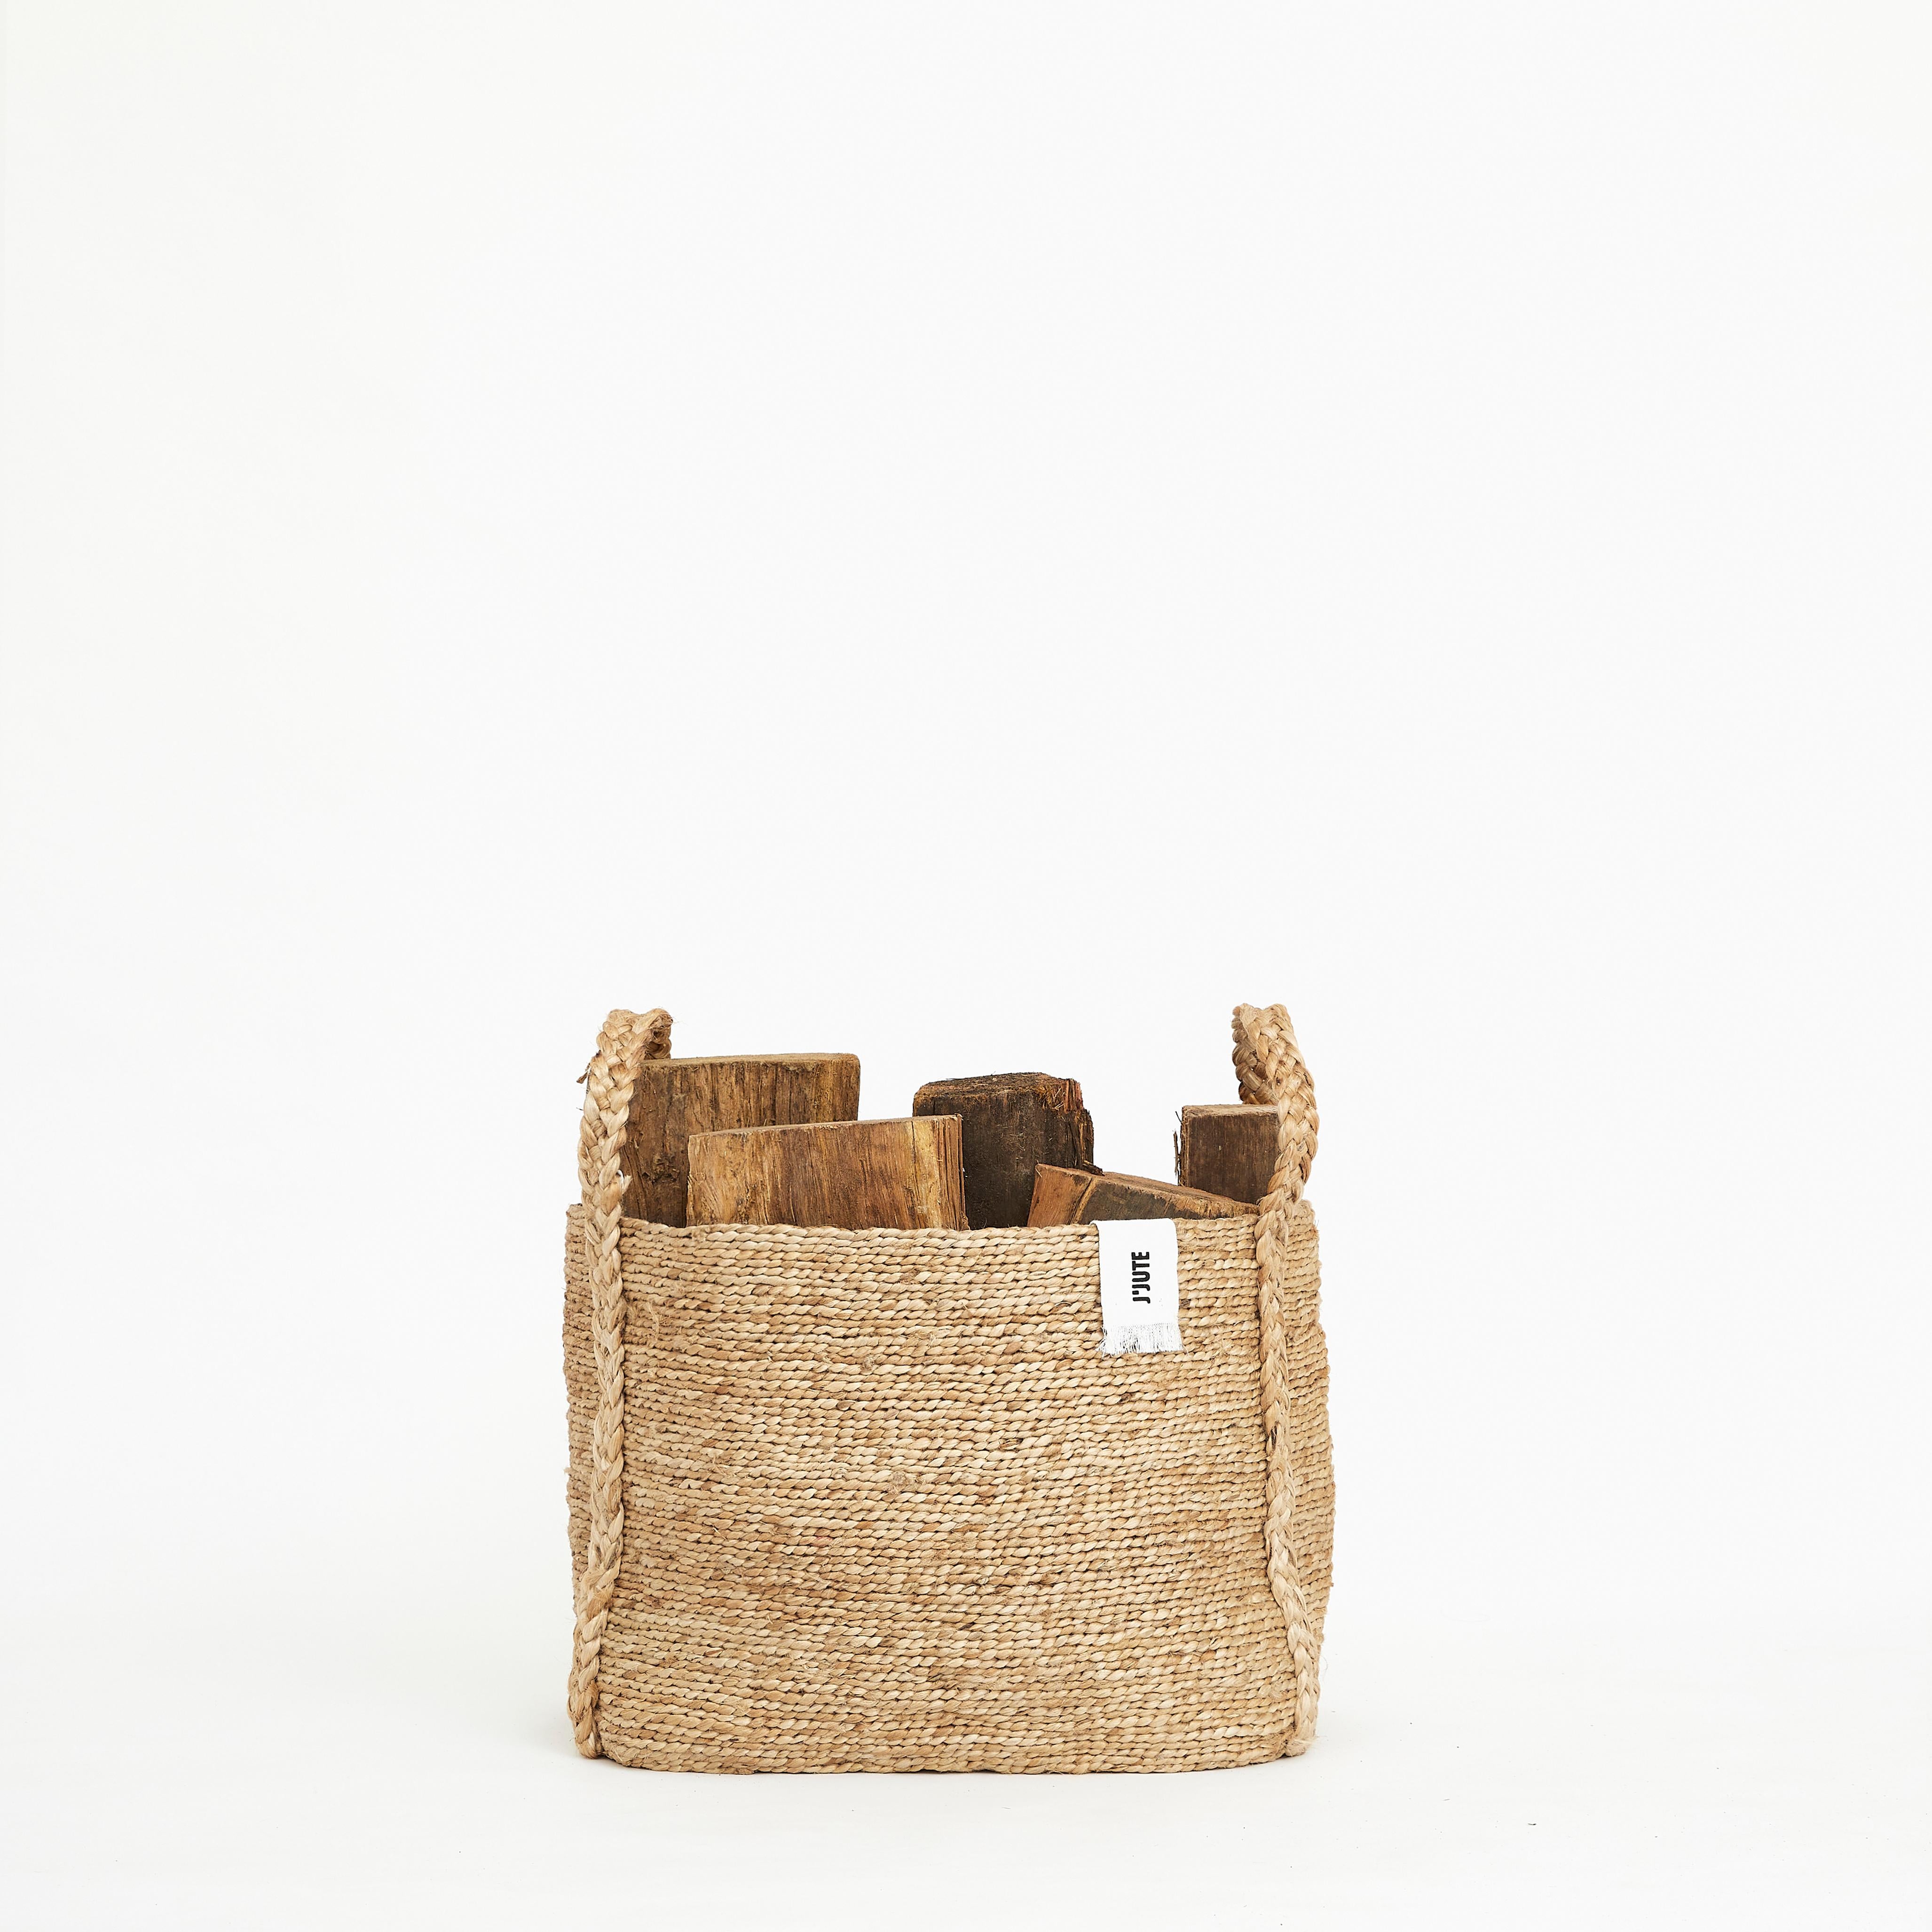 J'Jute Maya Jute Basket Medium, Natural

J'Jute is an Australian Luxury Home Brand that offers uncompromising quality handmade objects for the home. Each J'Jute style is designed by Taylor and Nicholas Barber in Bondi Beach, Australia and 100%